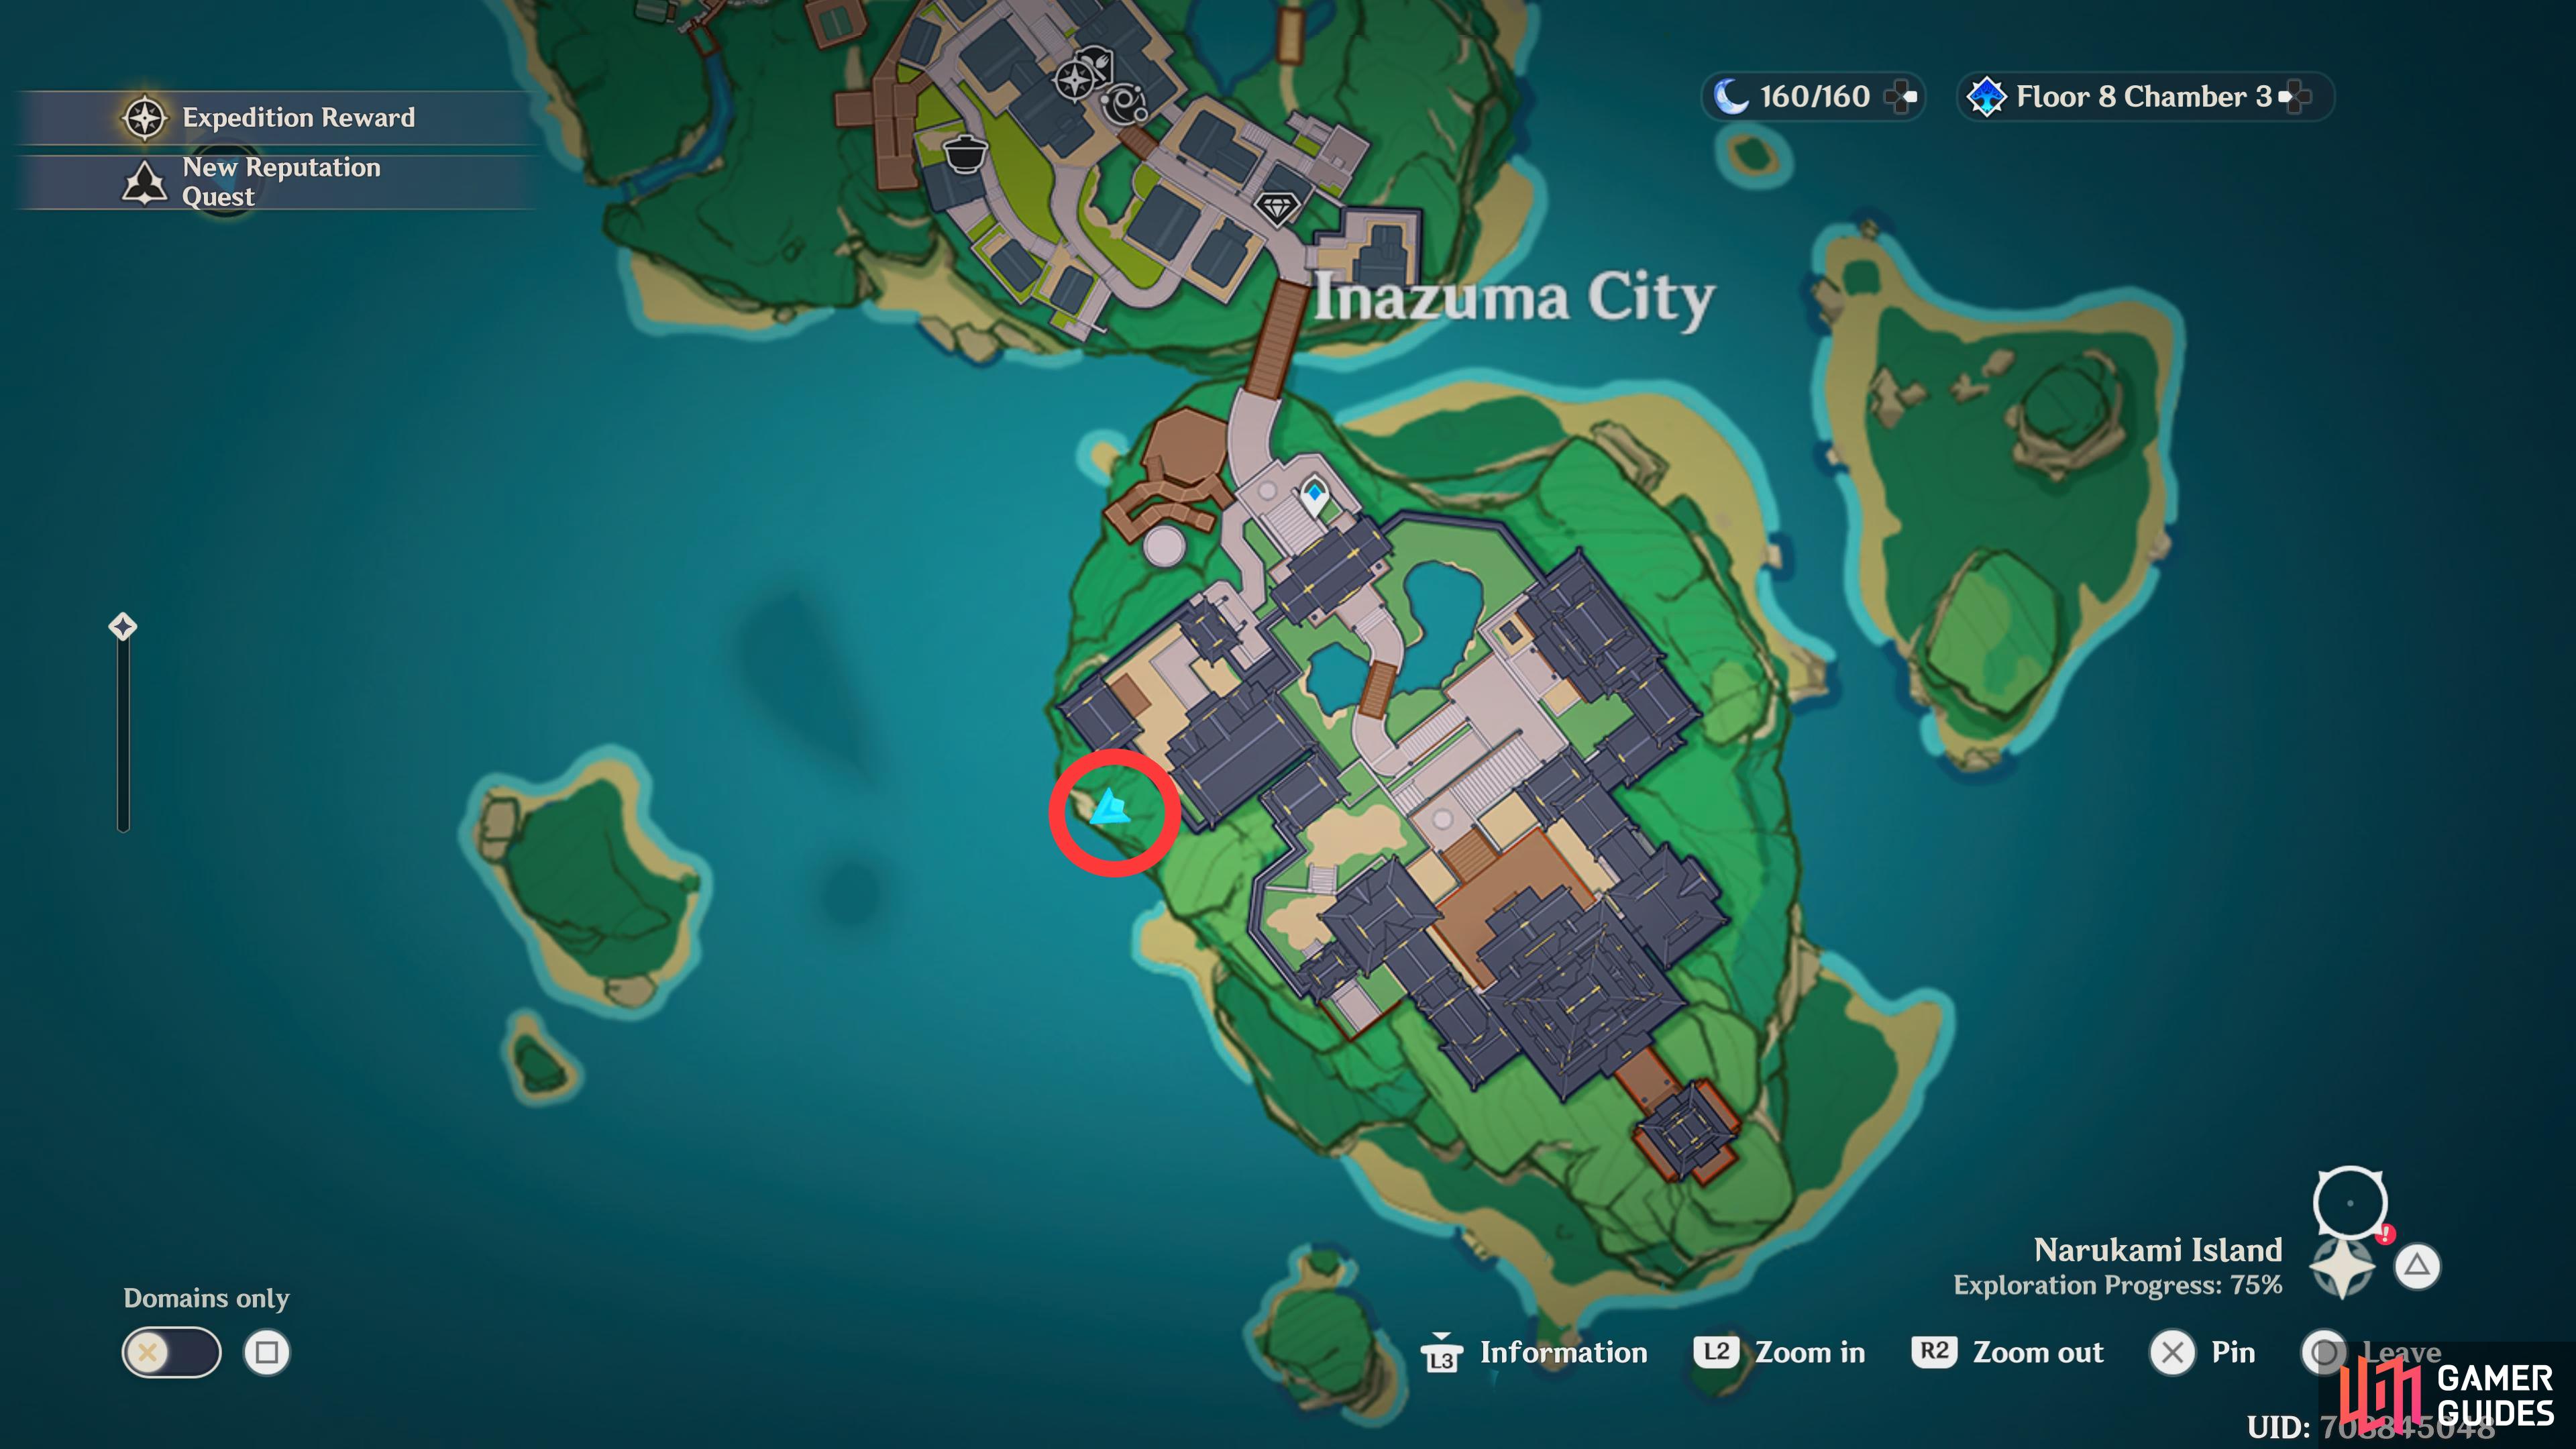 The location you are looking for is below Inazuma City.